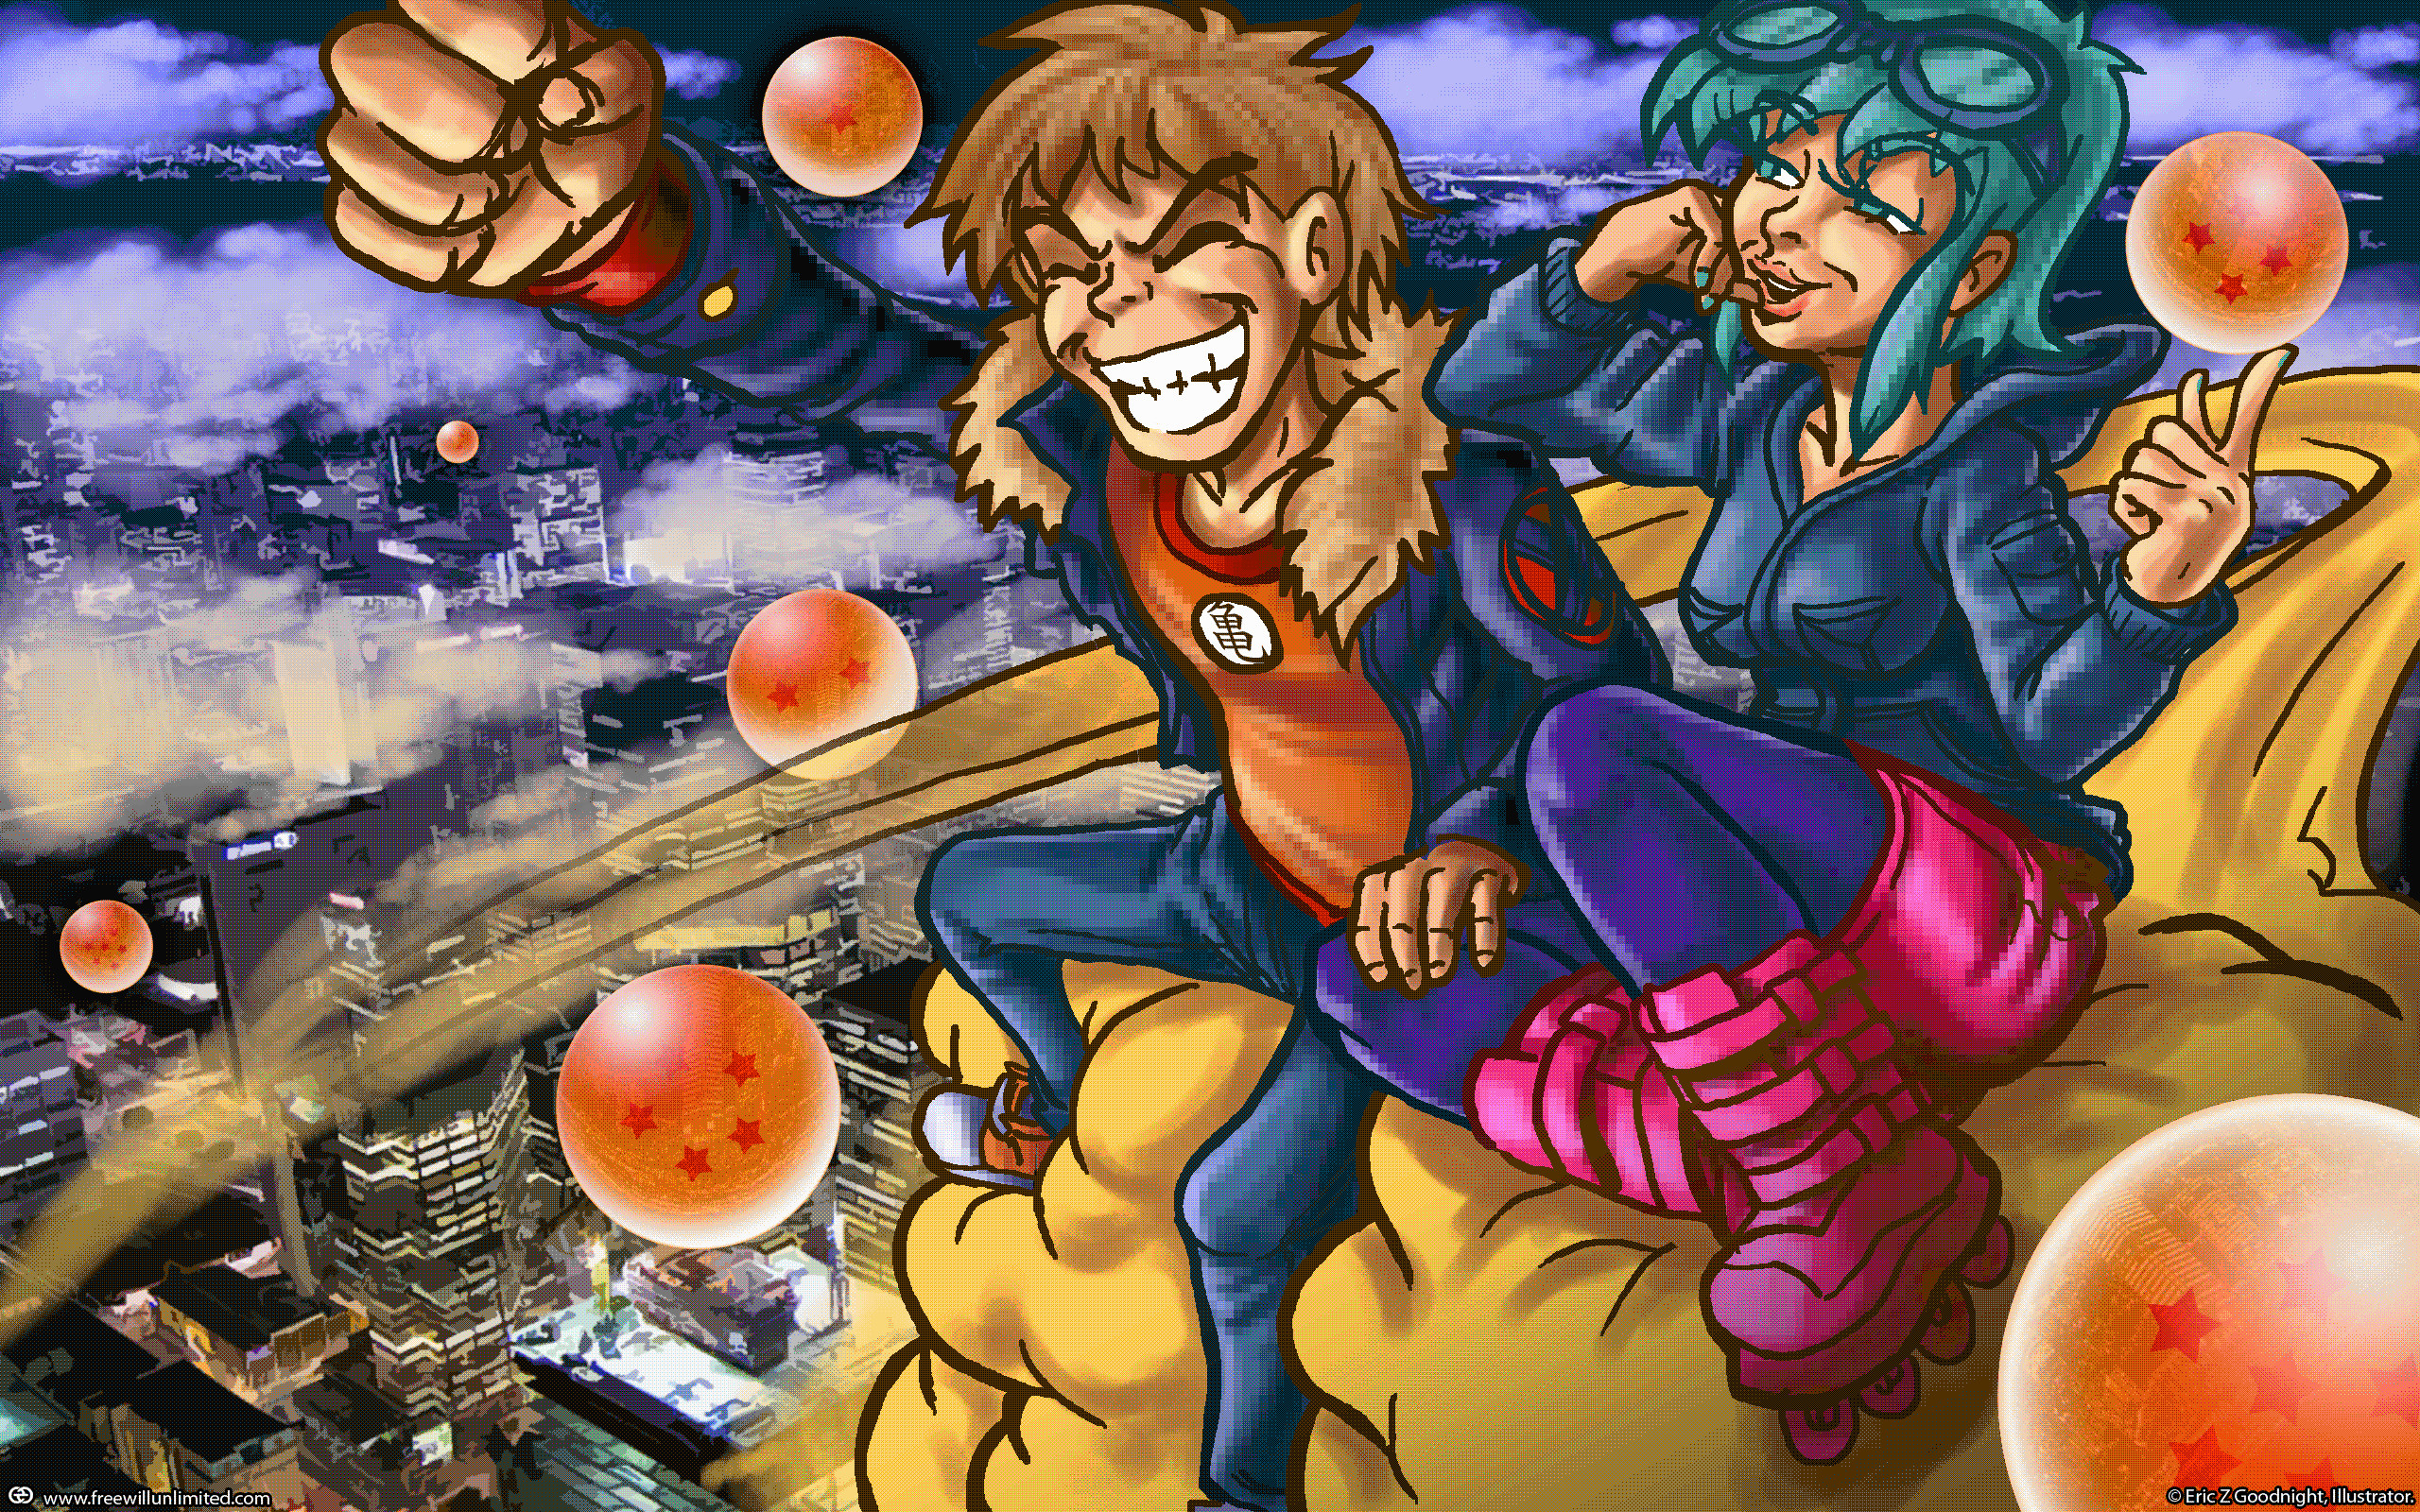 2560x1600 You can download “Scott Pilgrim vs Dragonball” as a wallpaper appropriate  size of 2560 x 1600.